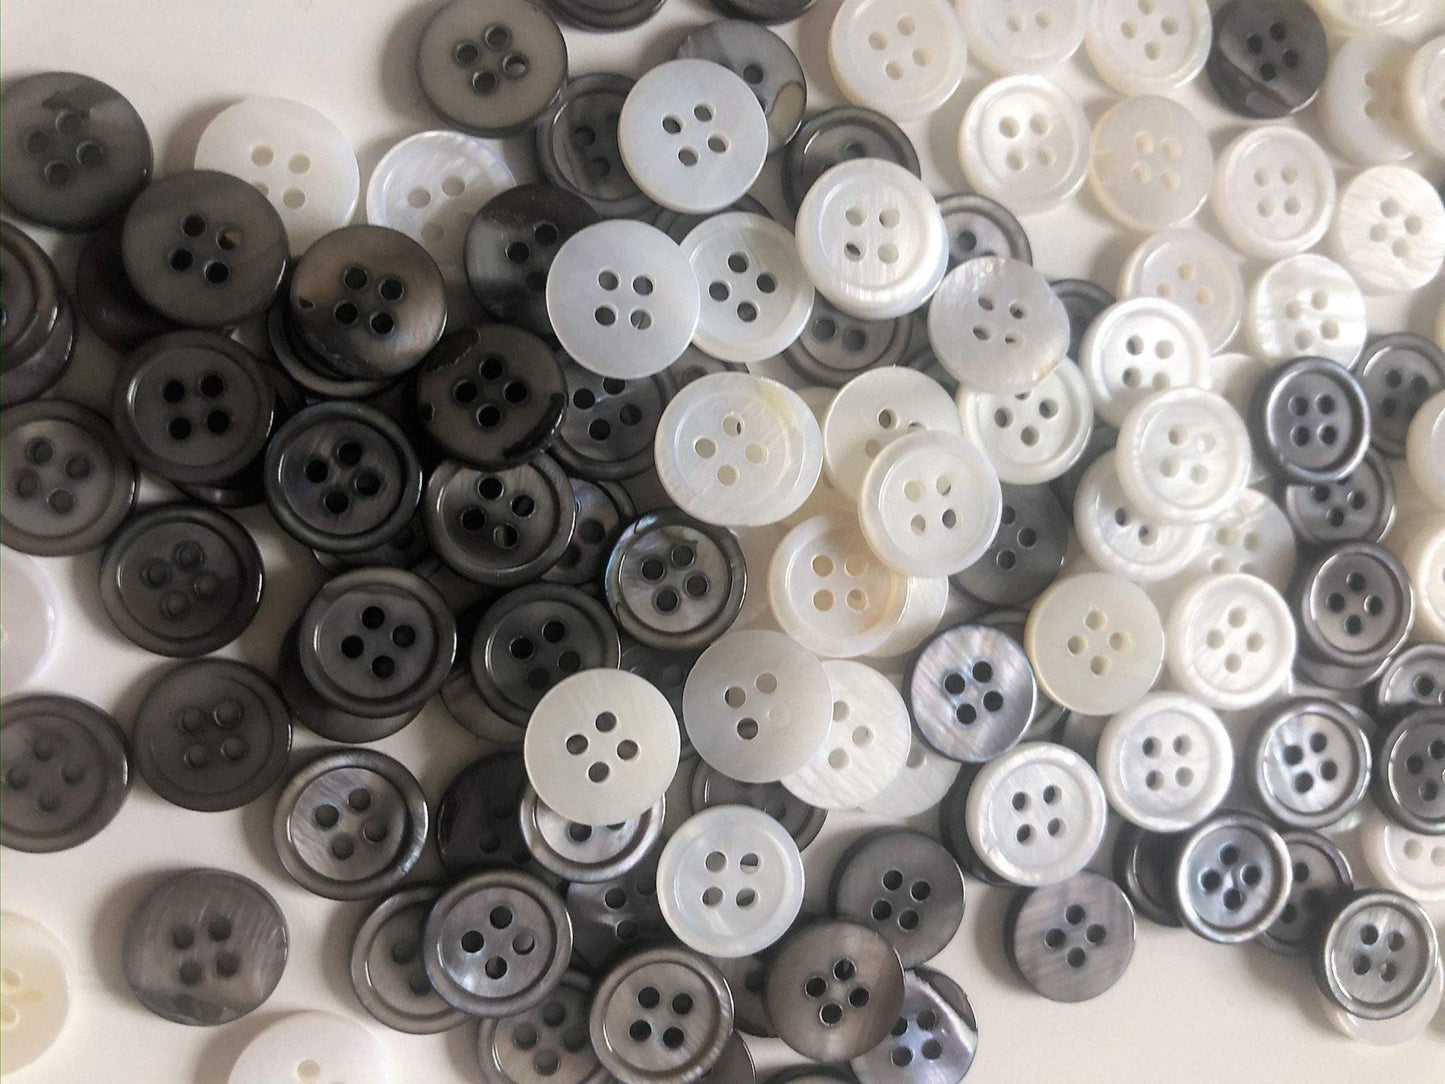 6 Grey Natural Shell Buttons - Made From Real Freshwater Shell